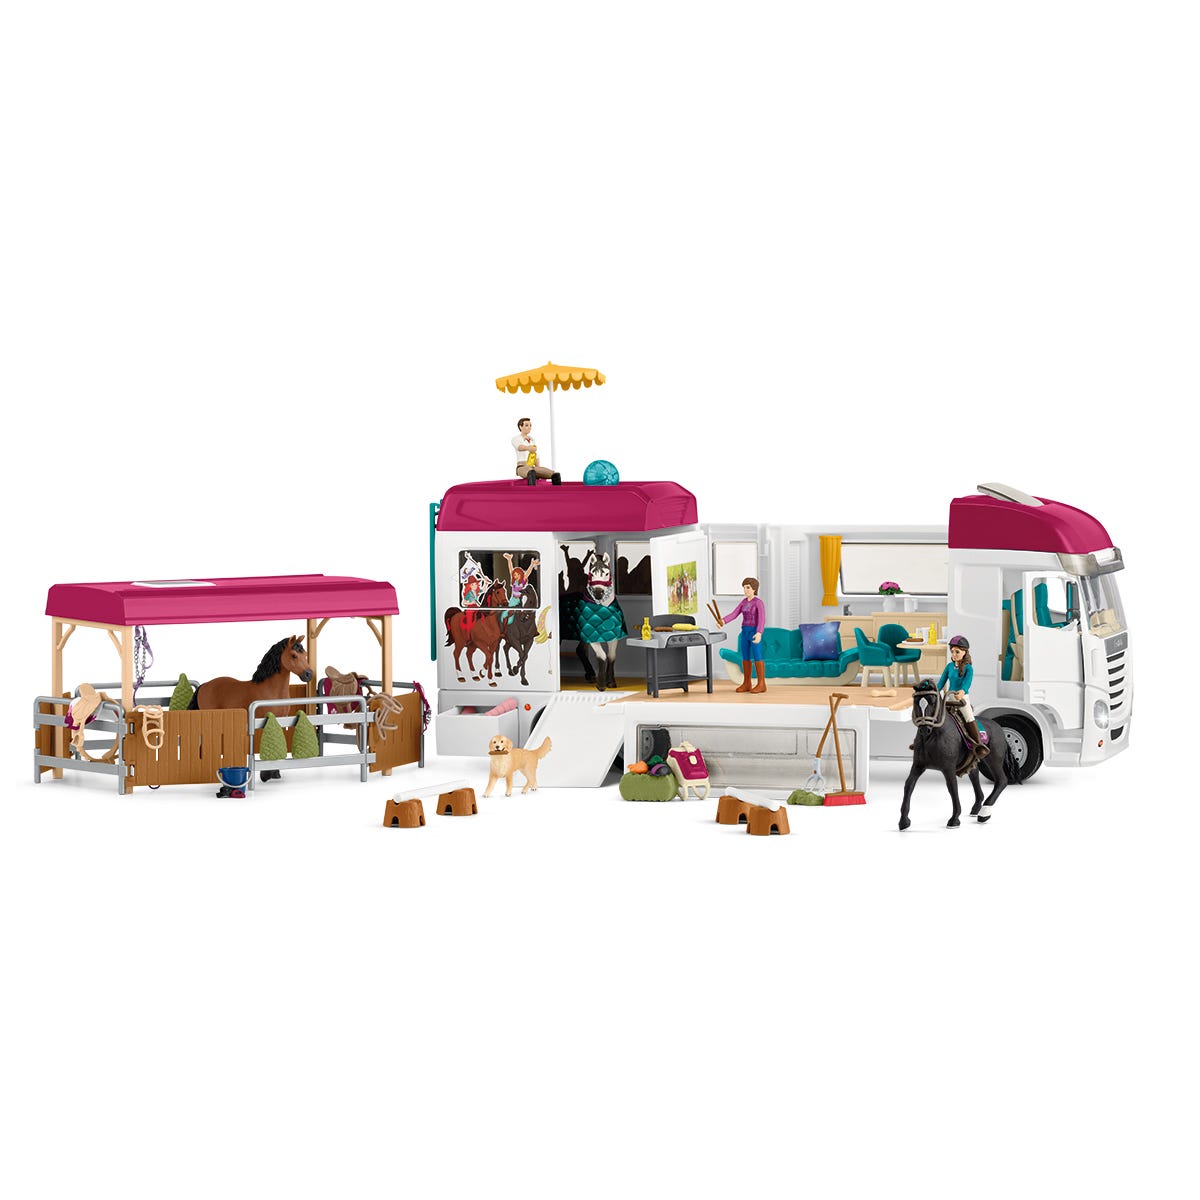 Pick up with | 42346 horse schleich CLUB HORSE box